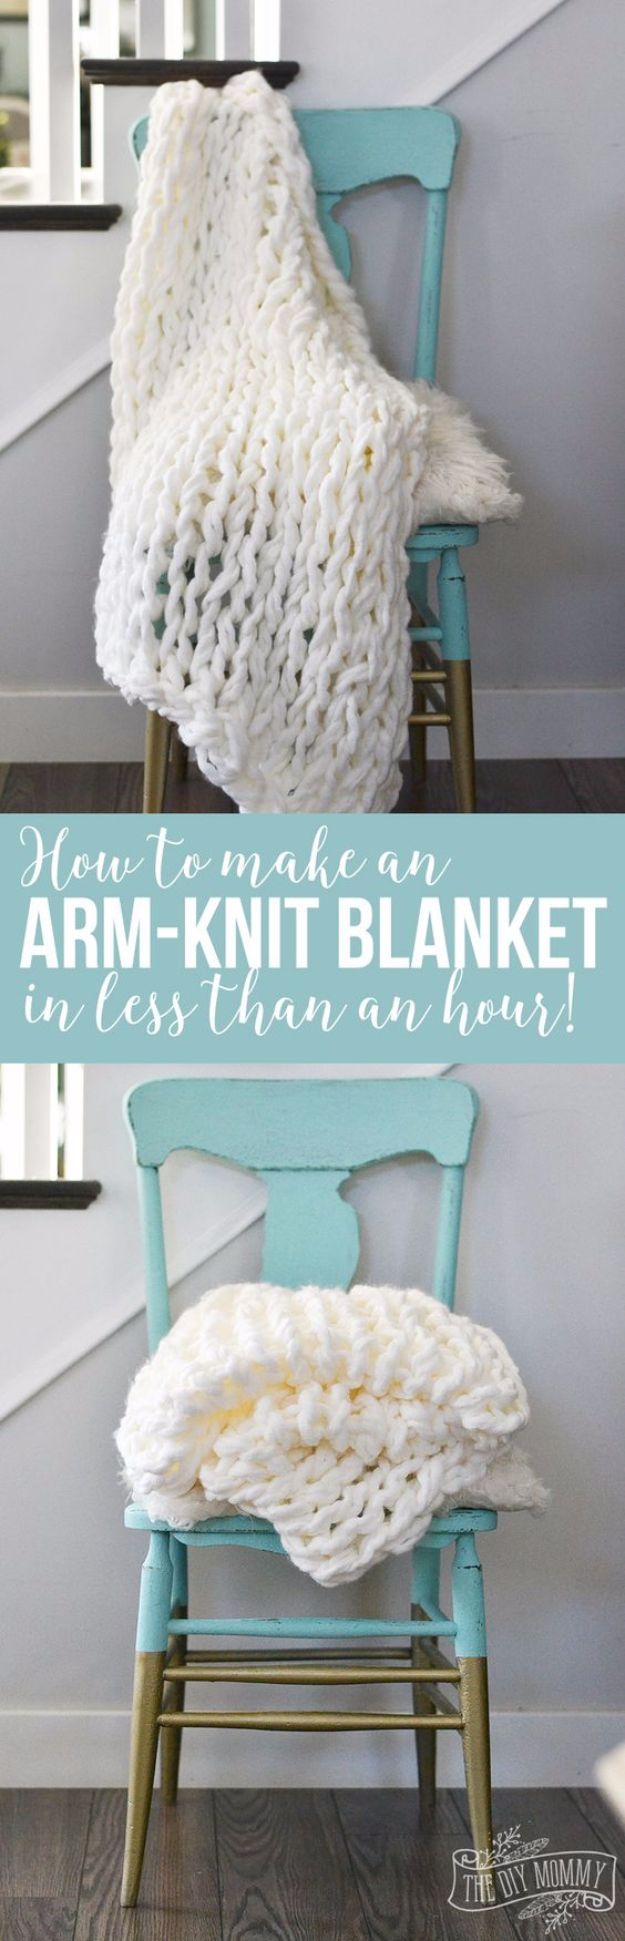 32 Easy Knitted Gifts – Arm Knit Blanket In Less Than An Hour – Last Minute Knitted Gifts, Best Knitted Gifts For Anyone, Easy